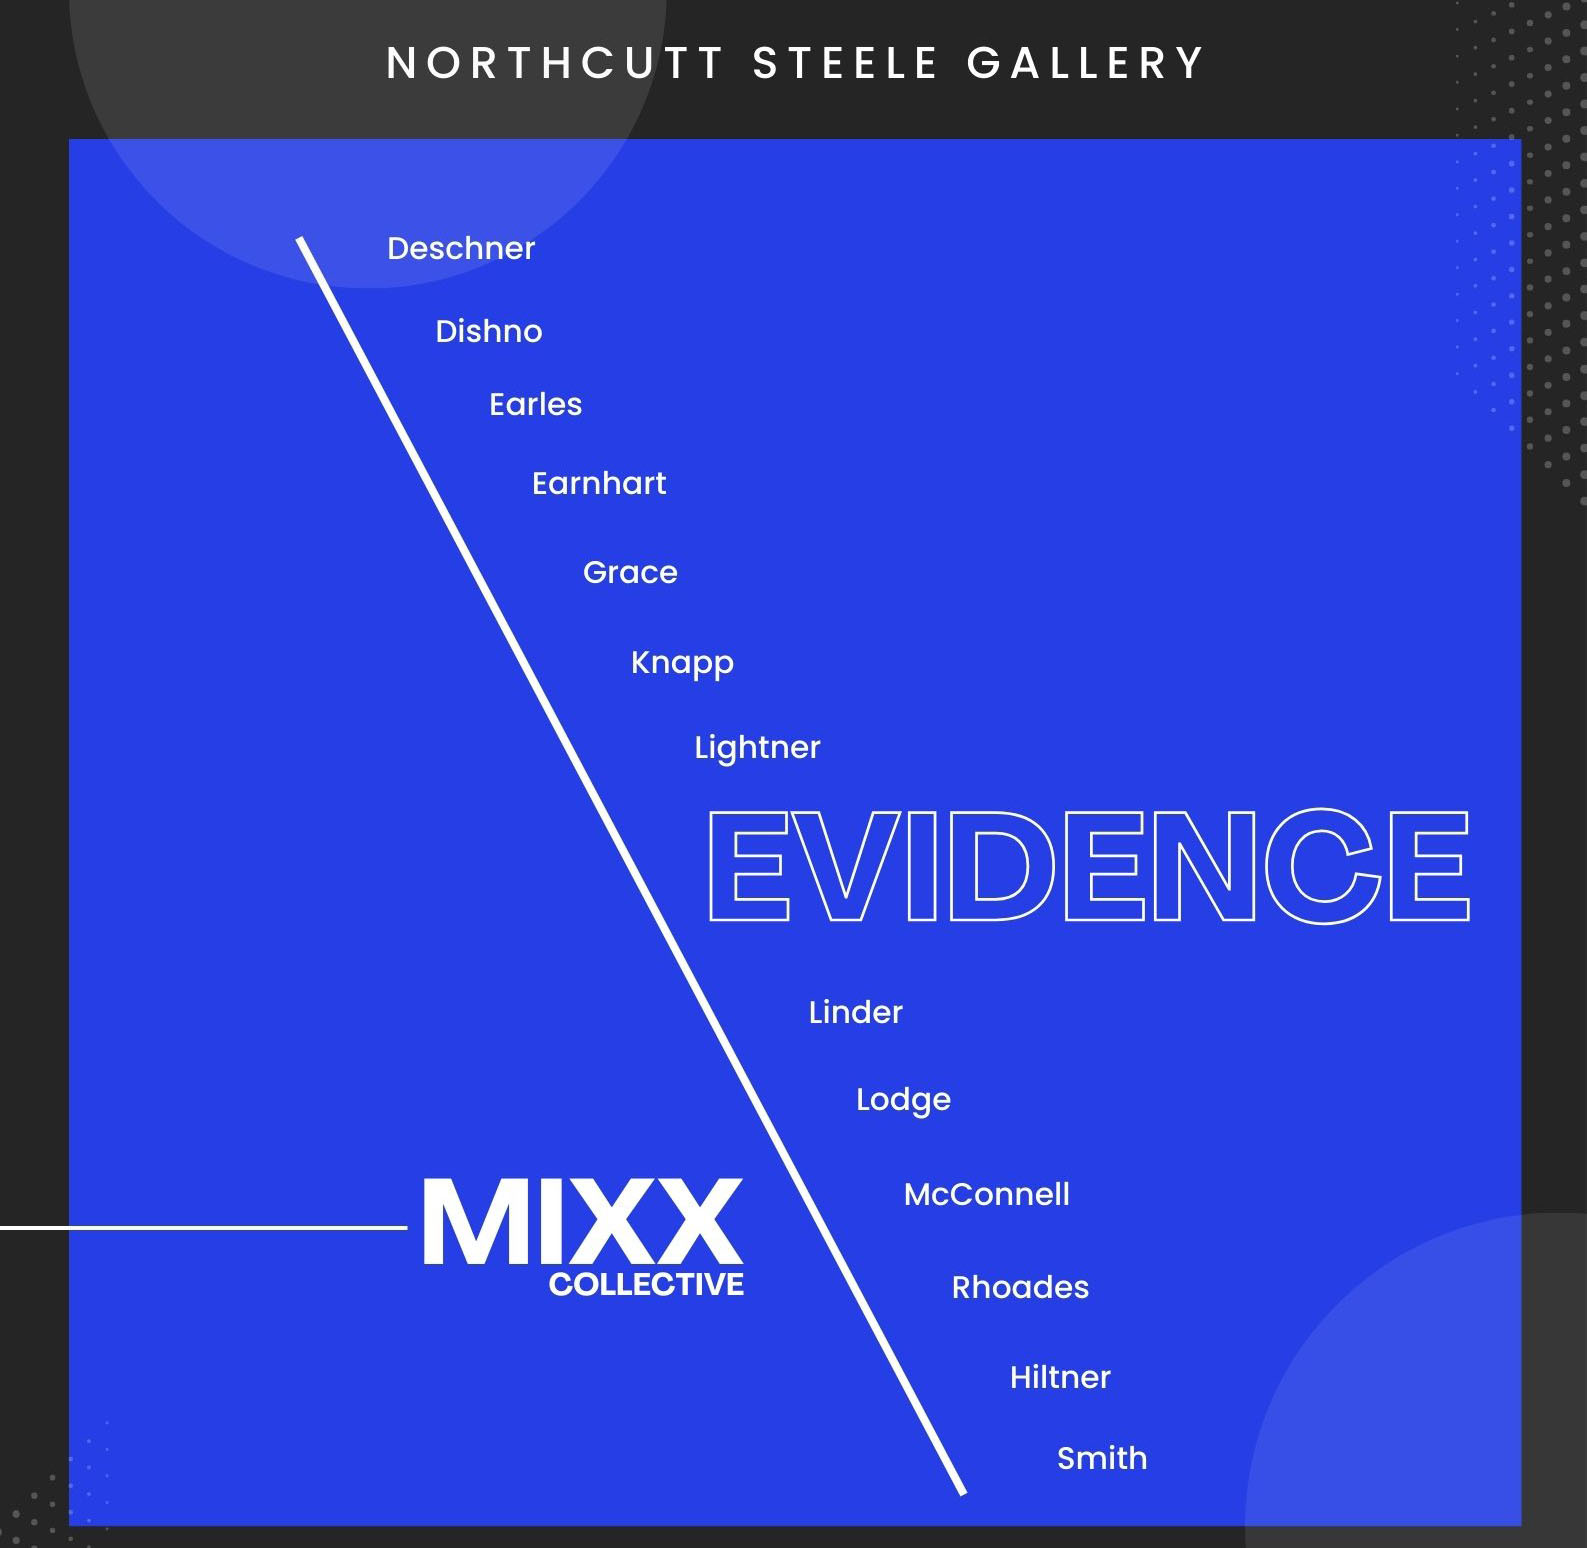 MIXX Poster Evidence Exhibition with list of artist names